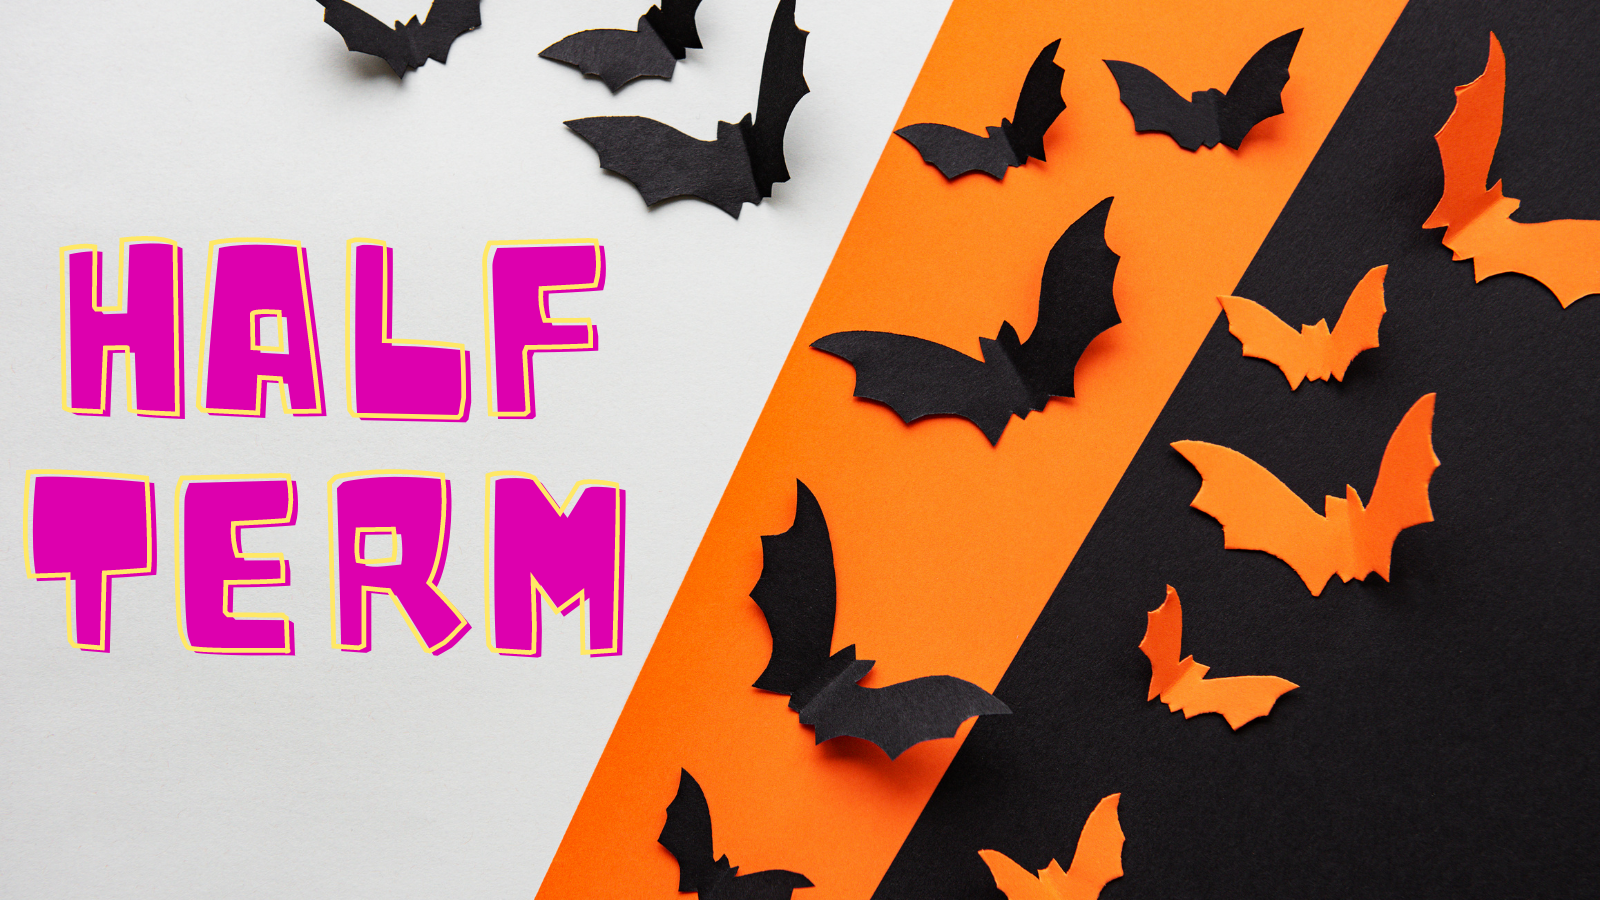 Half term in pink font with black and orange stripes and bats flying across